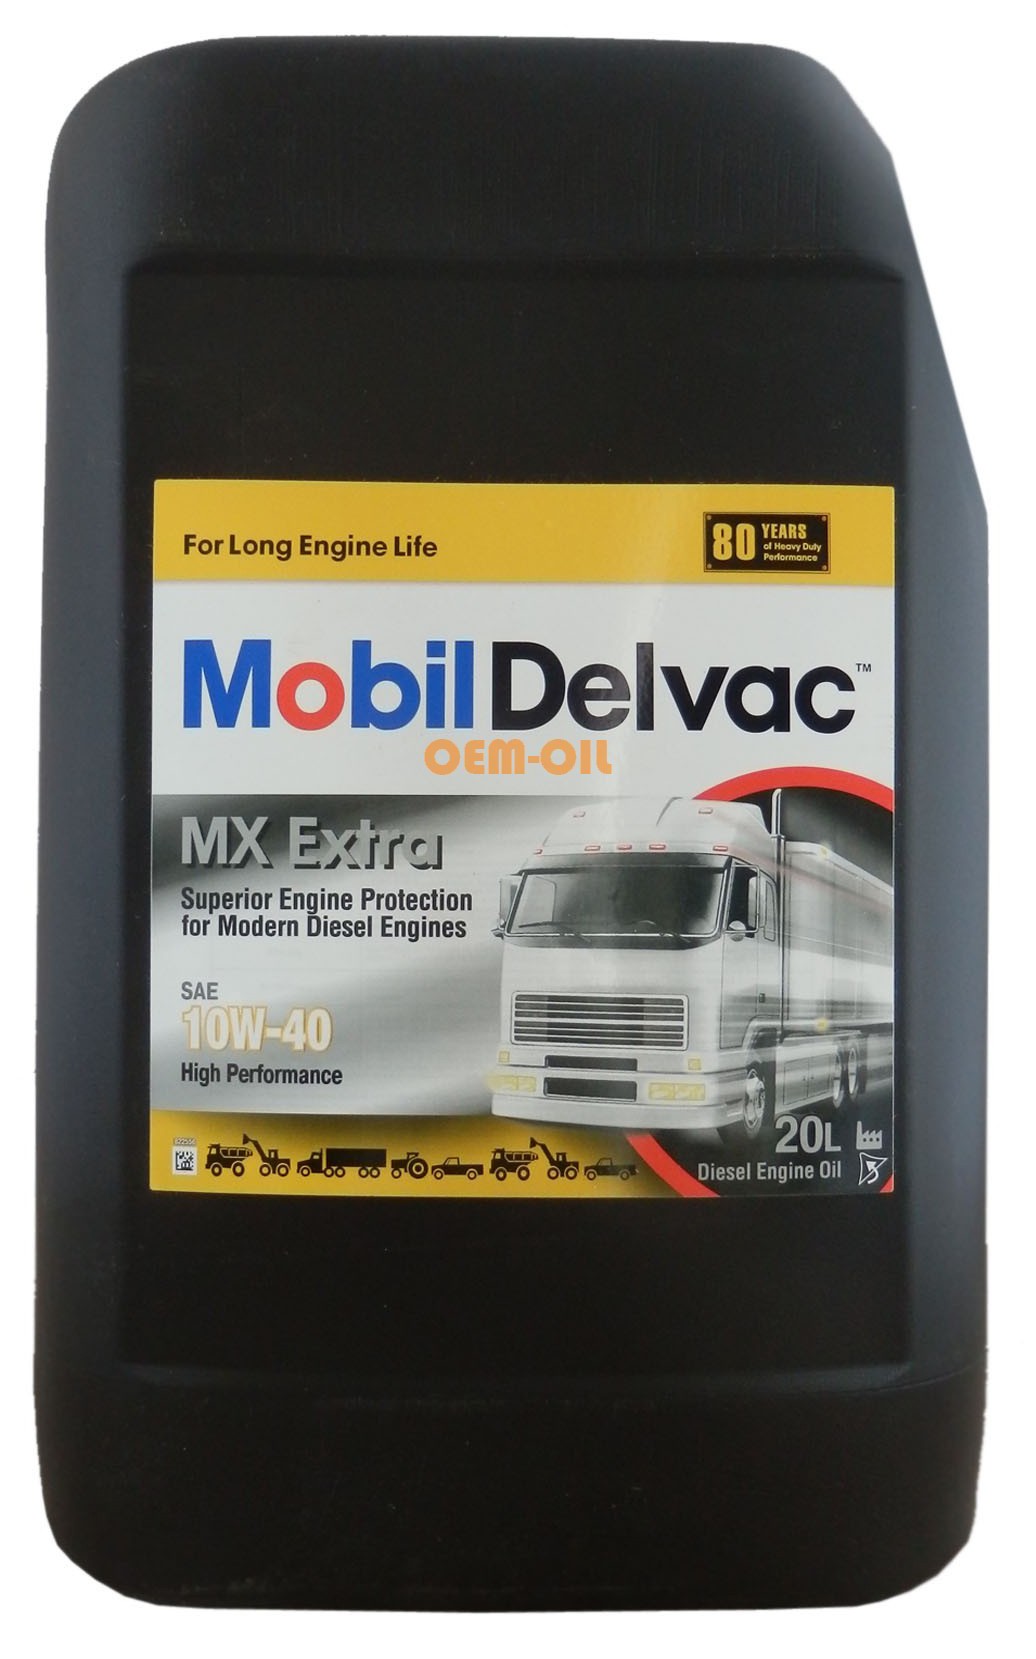 Масло mobil delvac mx. Mobil масло Delvac MX Extra 10w40 20л. Масло мотор. Mobil Delvac MX Extra 10w-40, 20l. Мобил Делвак МХ Экстра 10w 40. Mobil Delvac MX Extra 10w-40 20.